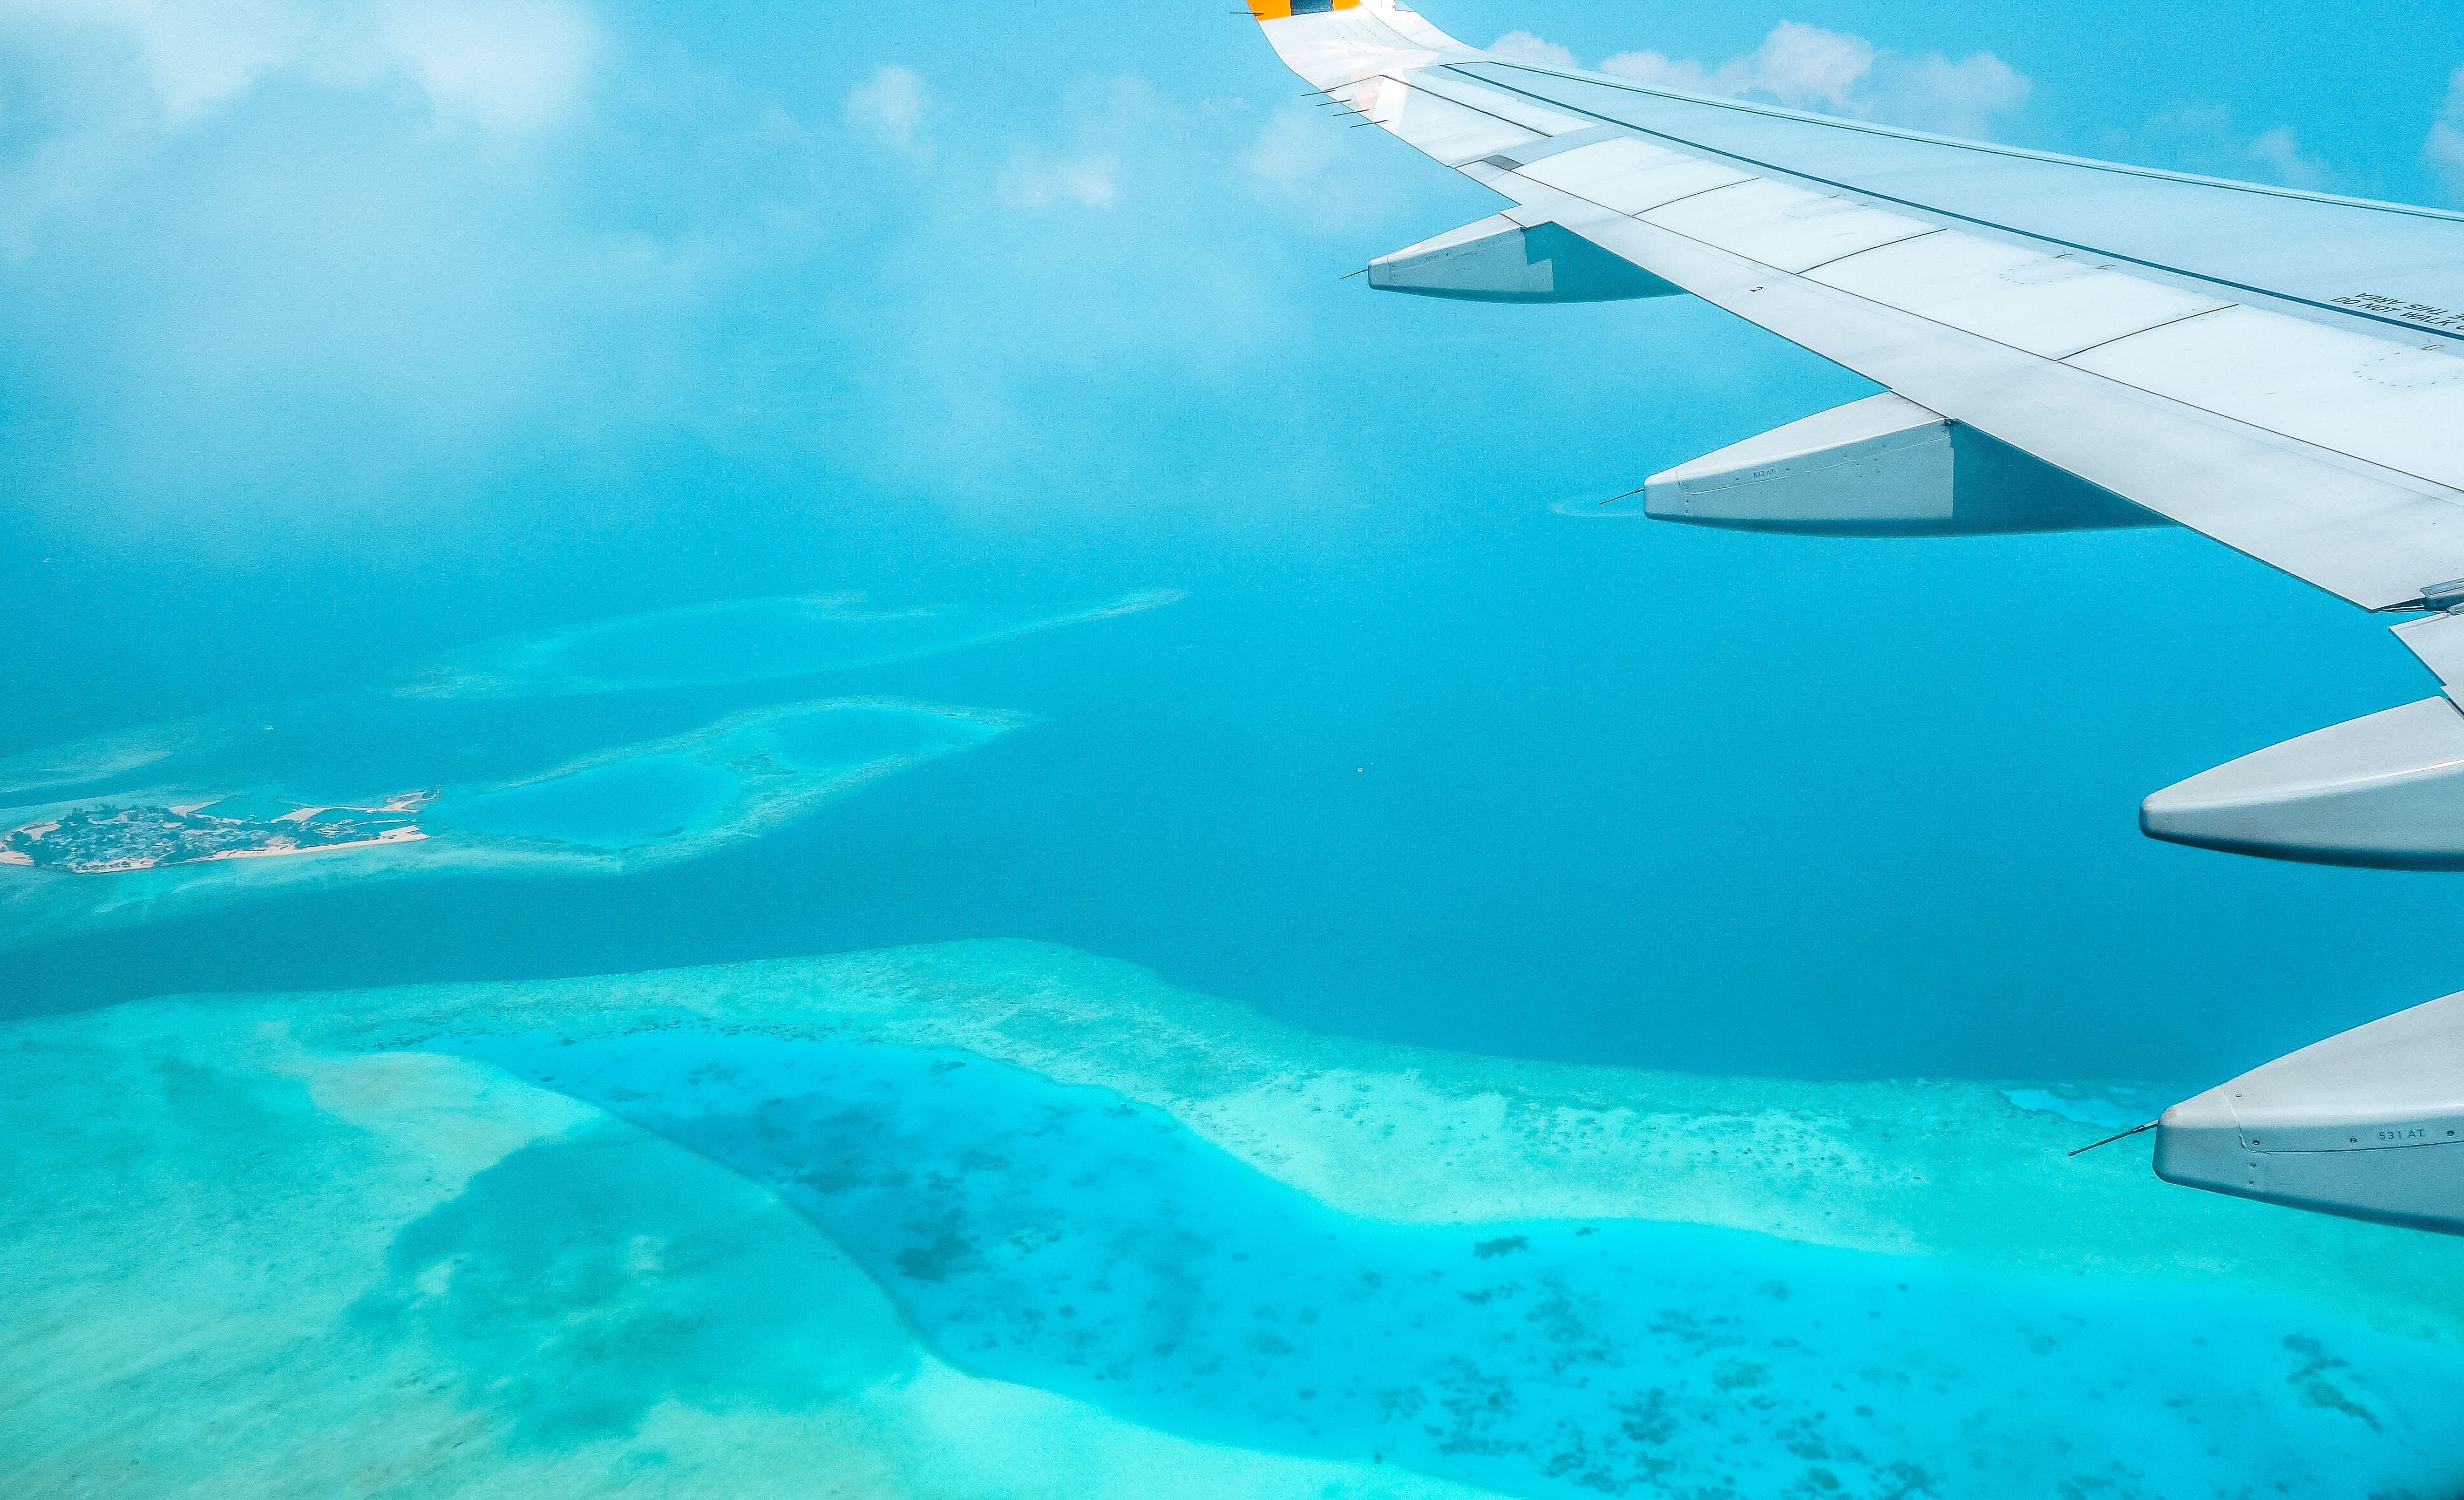 maldives from the plane view3.jpg